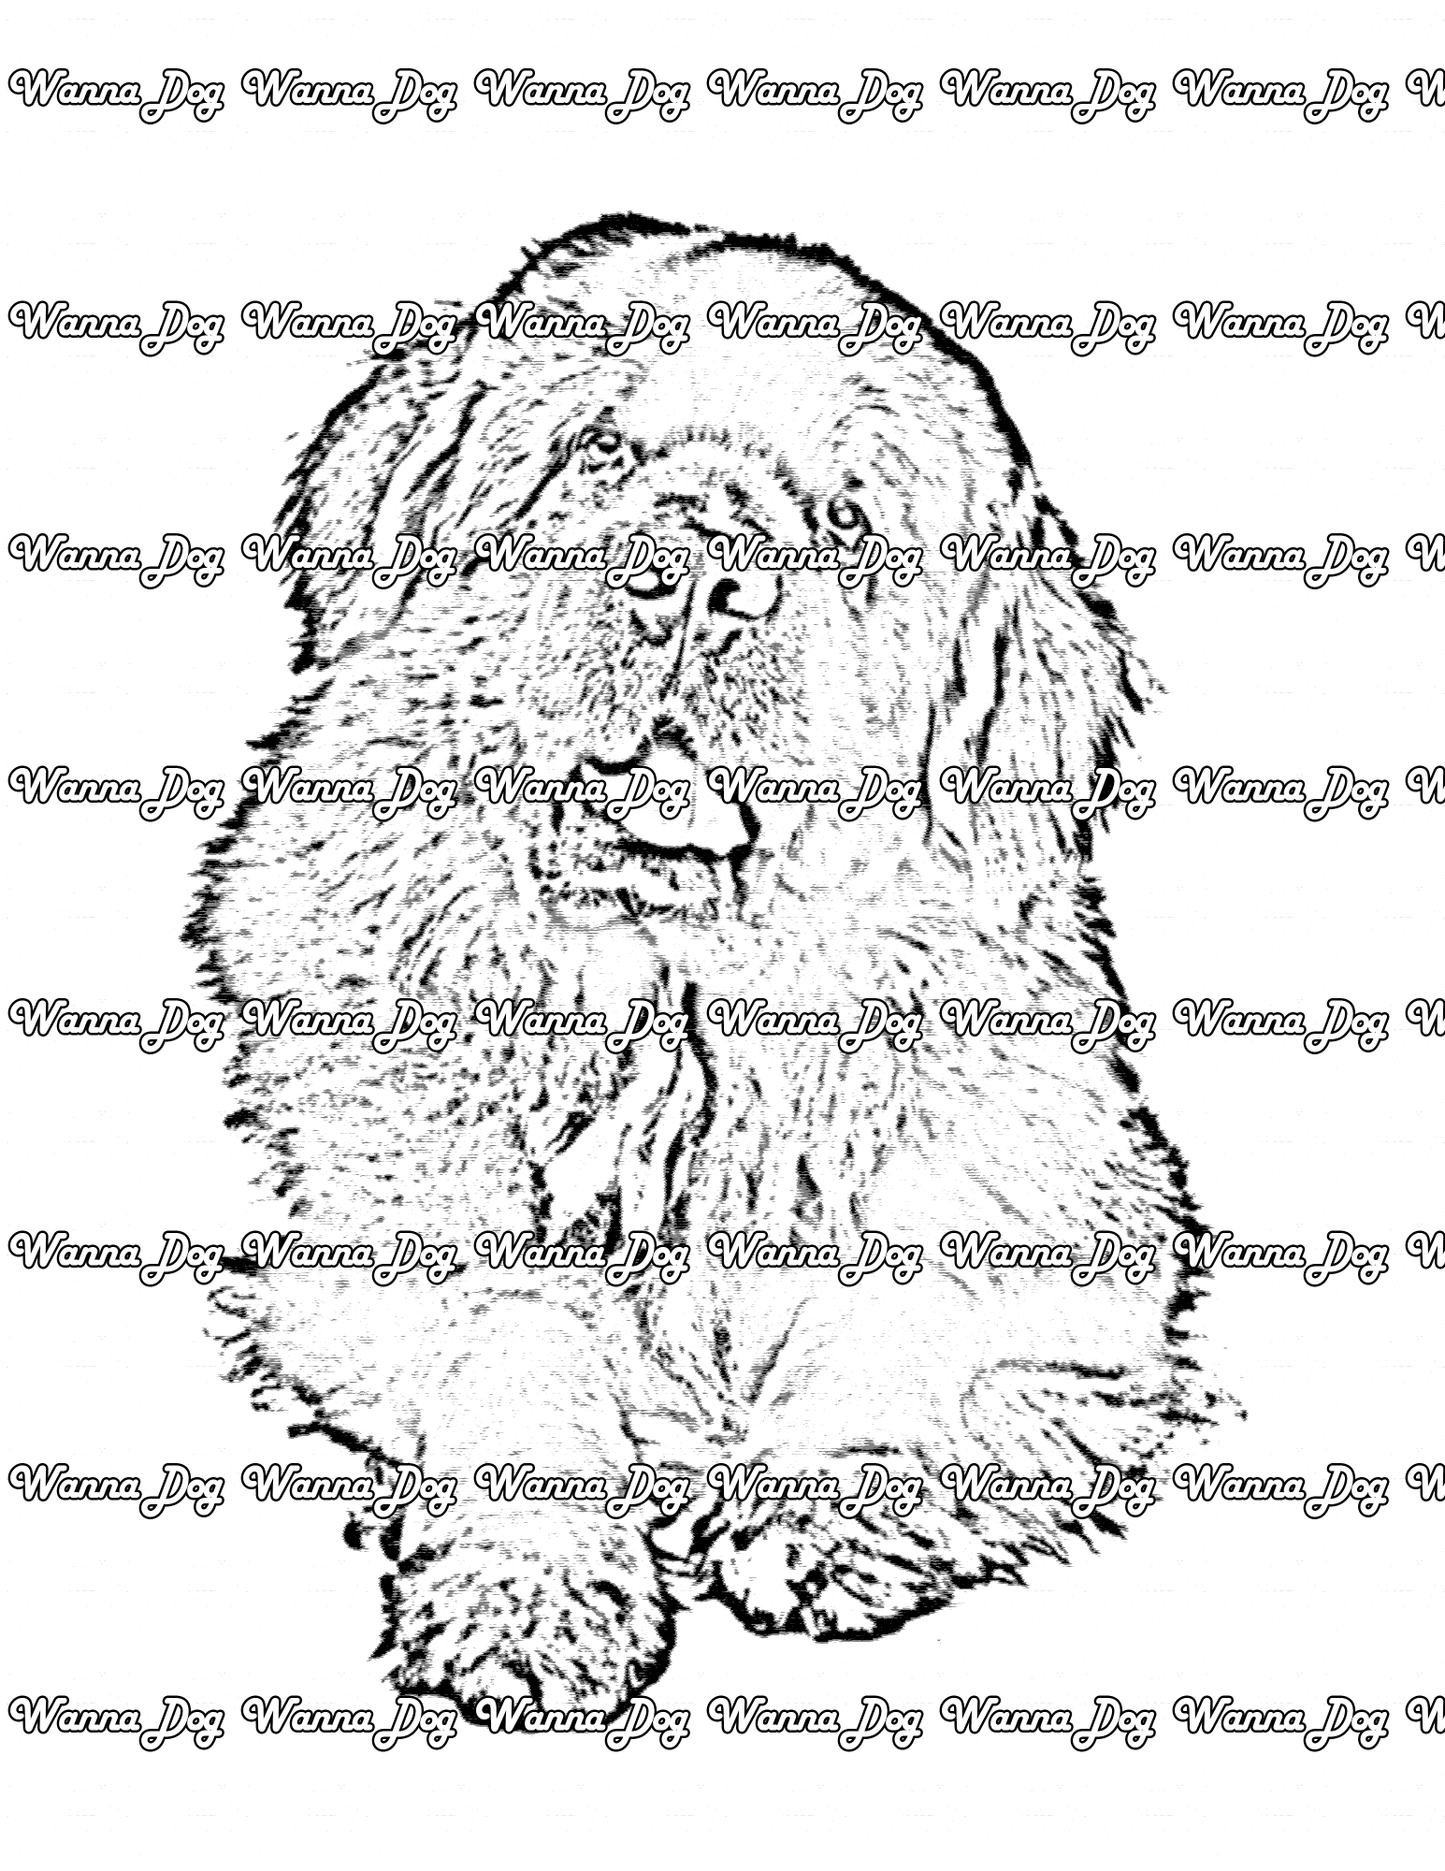 Newfoundland Coloring Page of a Newfoundland posing for the camera